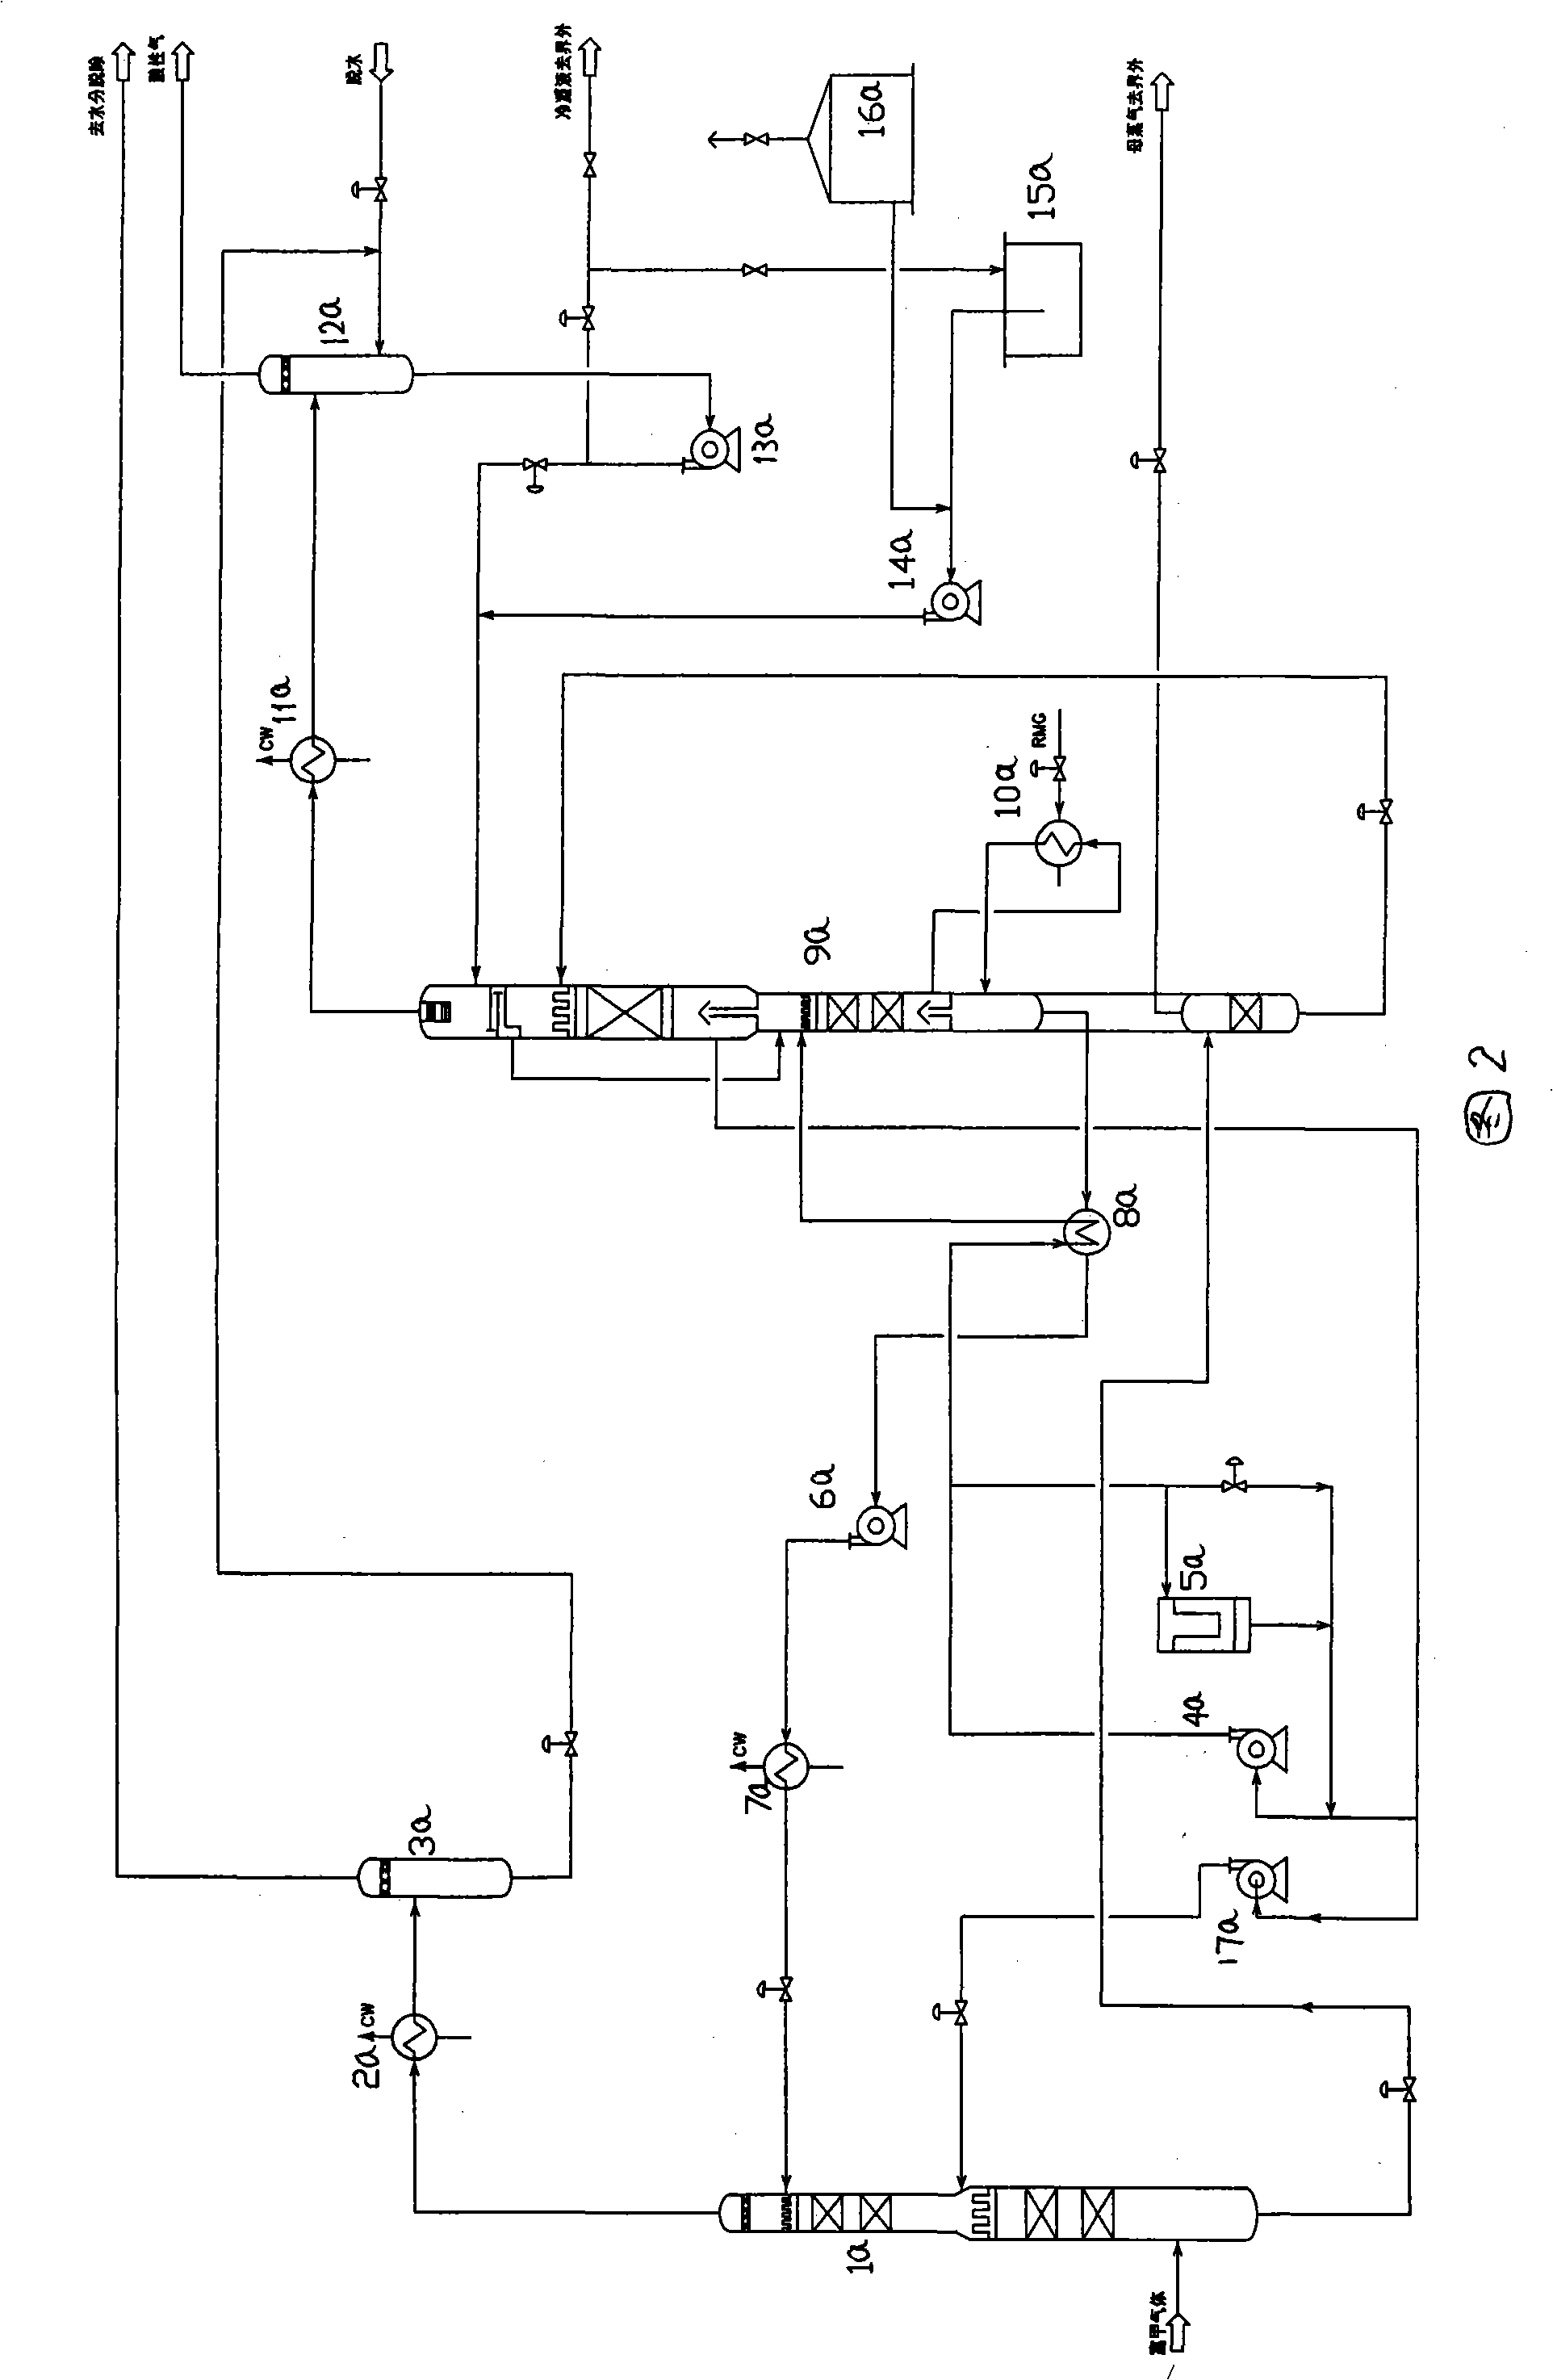 Front end combination purification technique for producing liquefied natural gas from mixture gas rich-containing methane